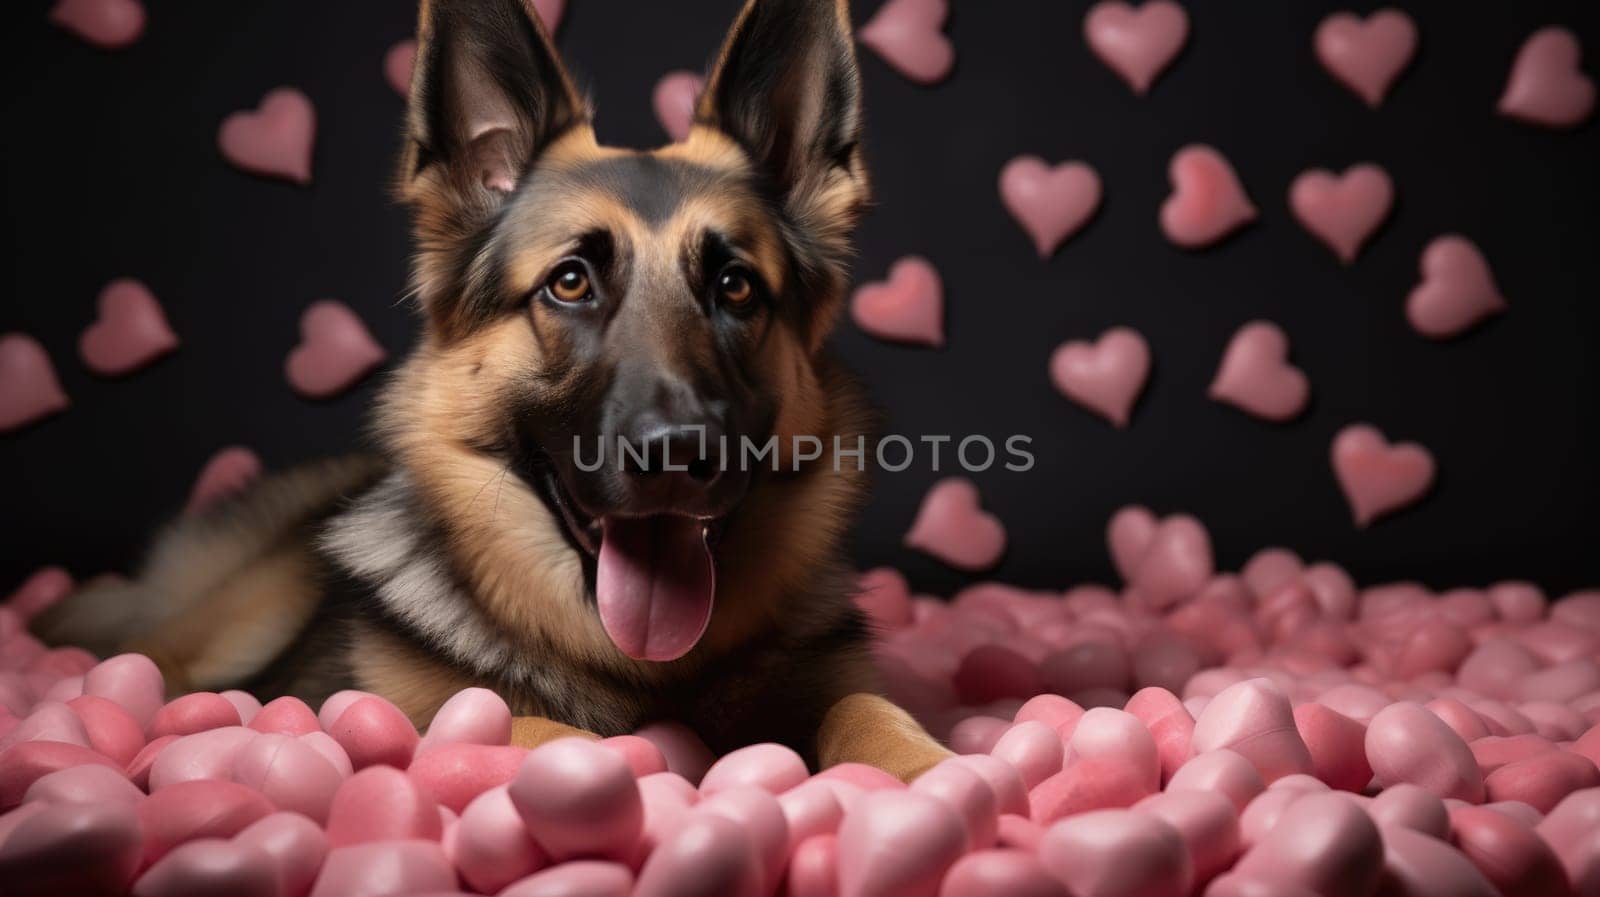 Lovely German shepherd dog with Valentine's day pink hearts looking at the camera by JuliaDorian